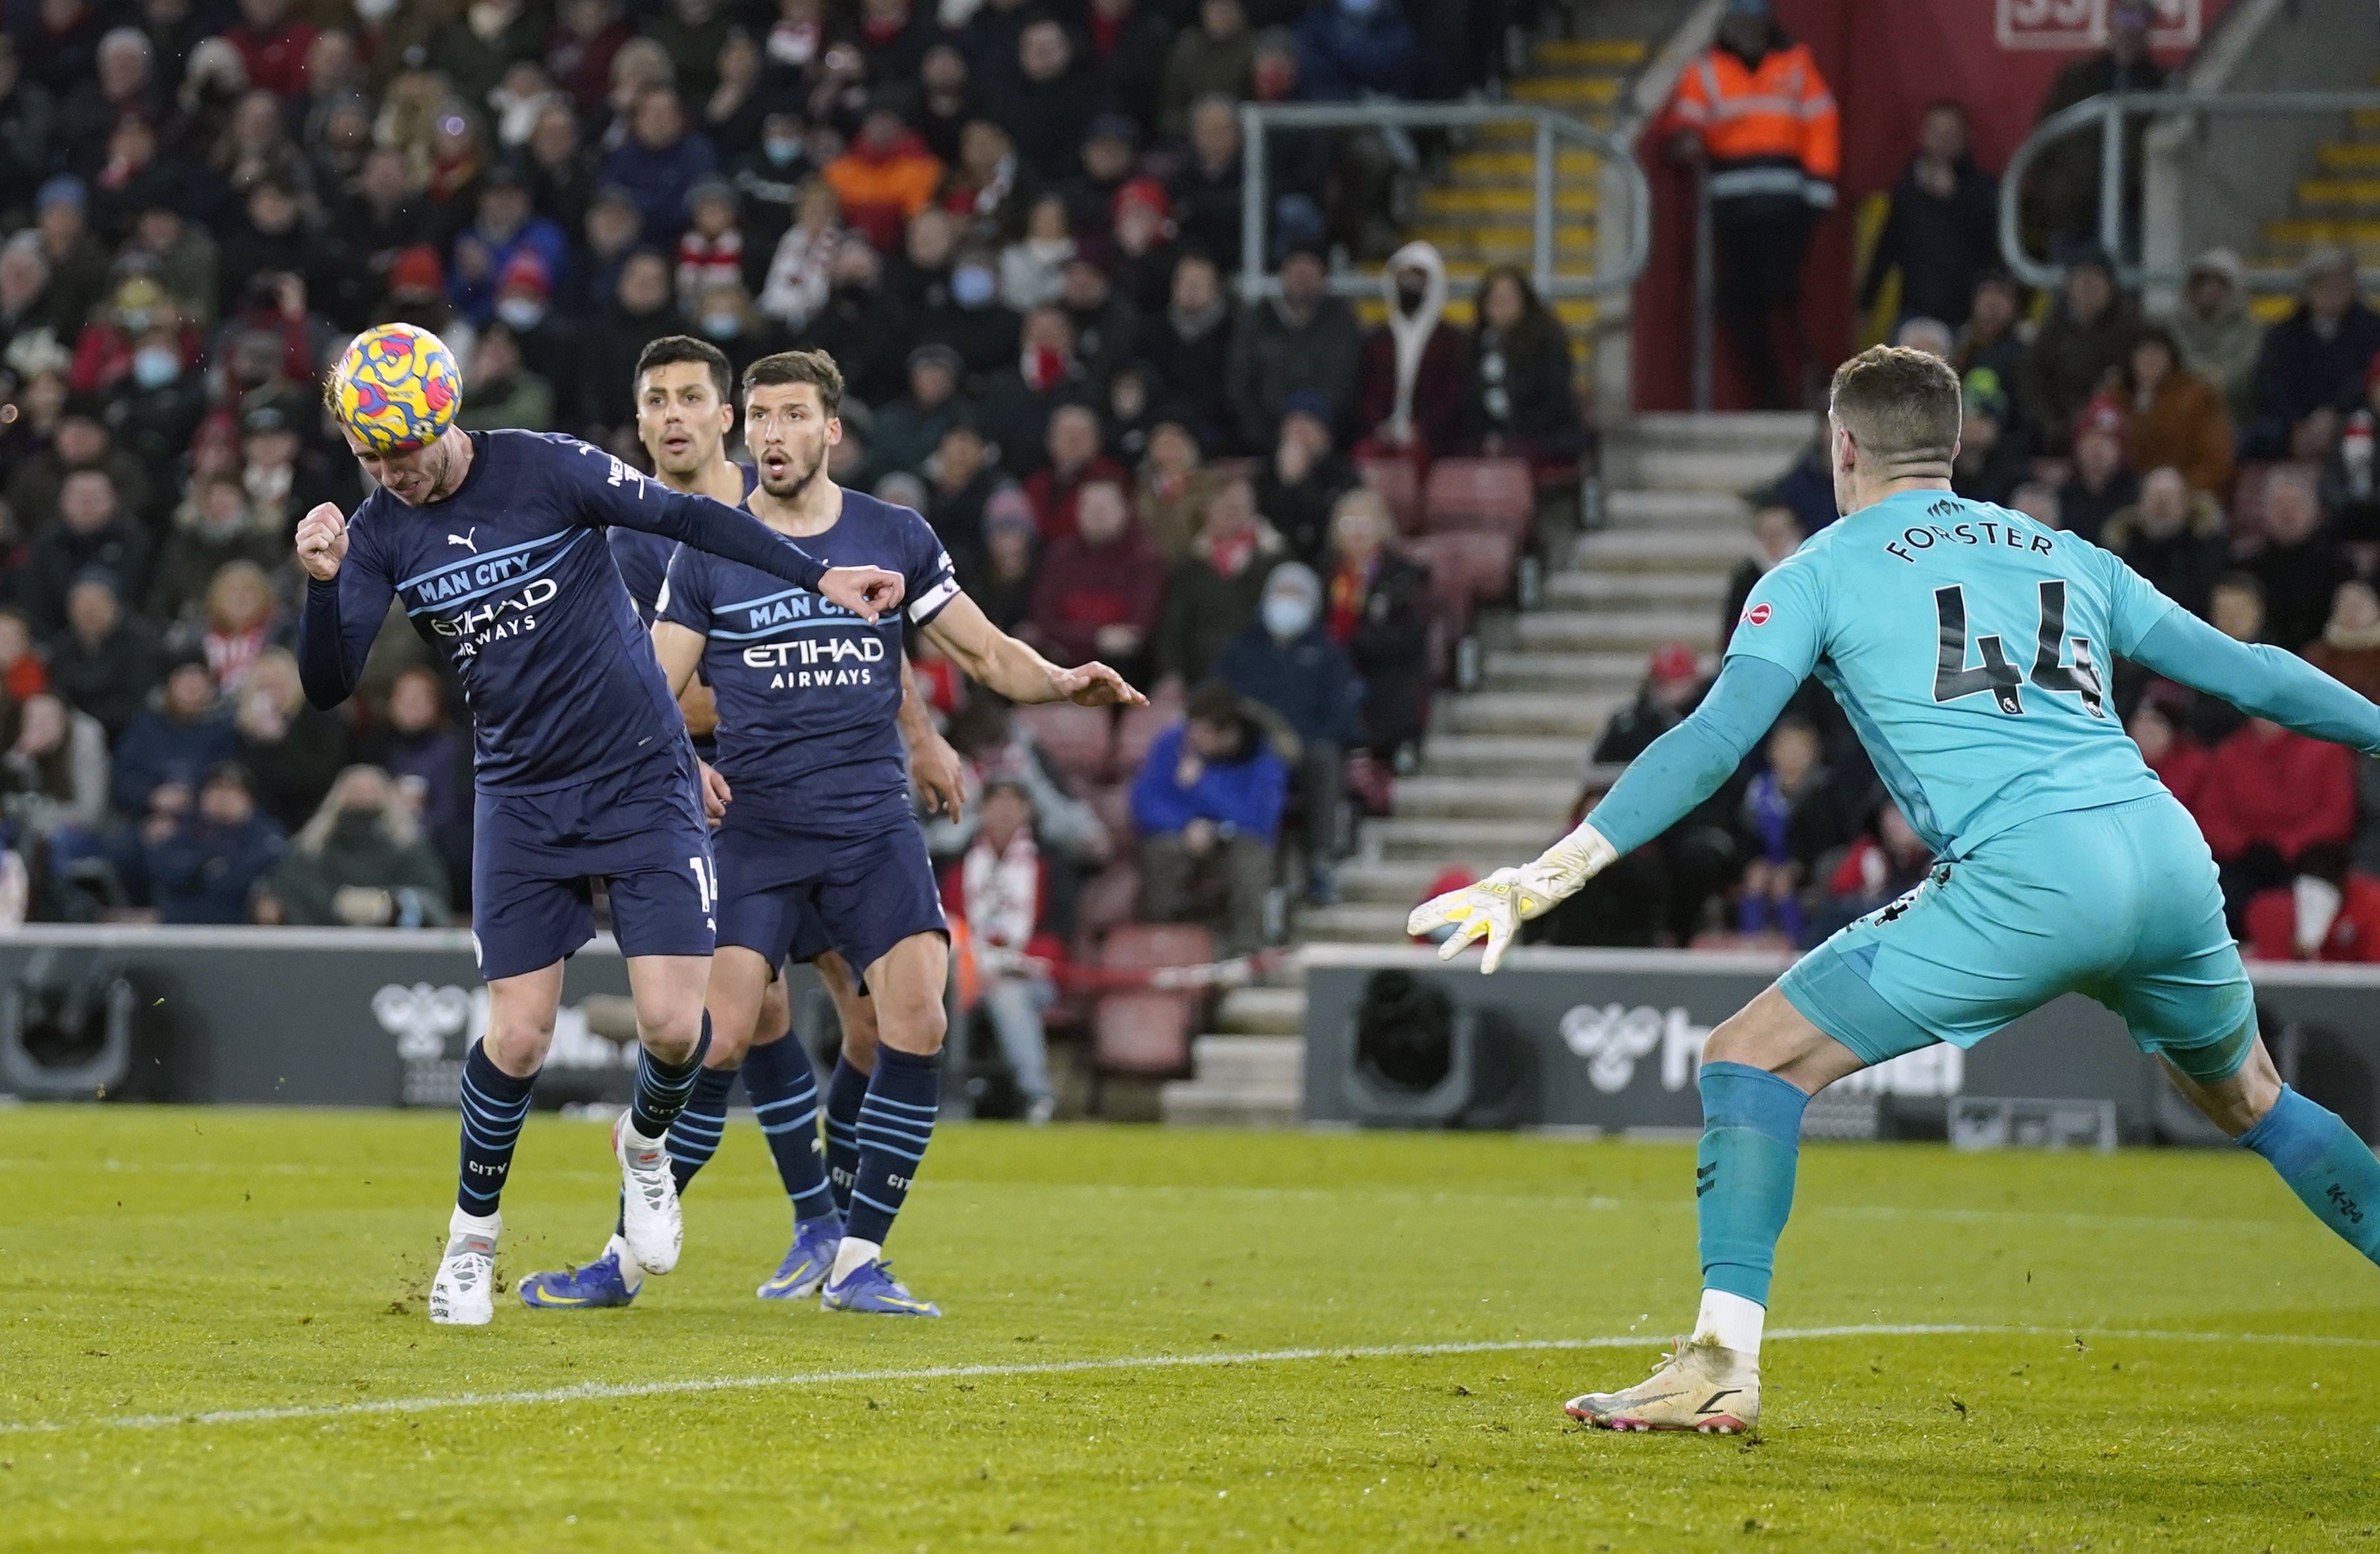 Manchester City’s Aymeric Laporte scores his side’s first goal to level at 1-1 against Southampton (Andrew Matthews/PA)